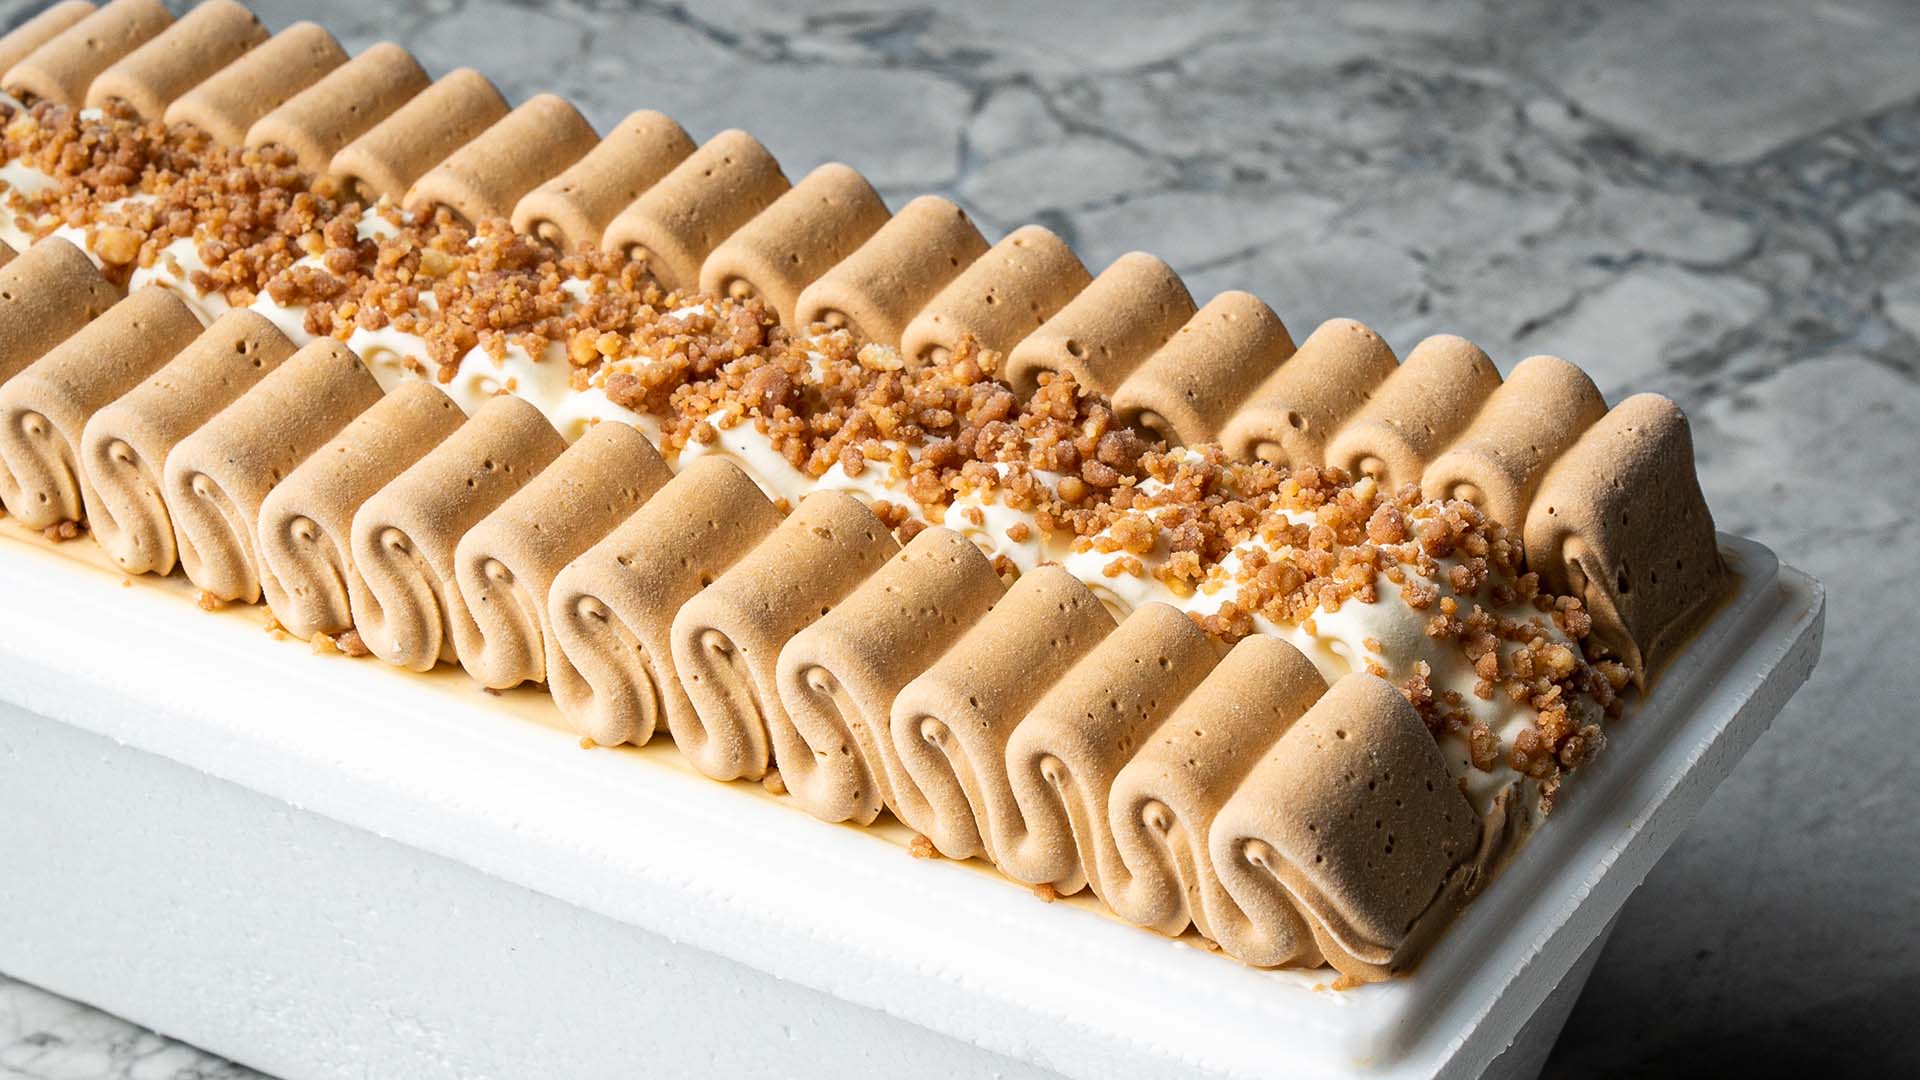 Gelato Messina Is Releasing a Golden Gaytime-Inspired Version of Its Super-Fancy Viennetta